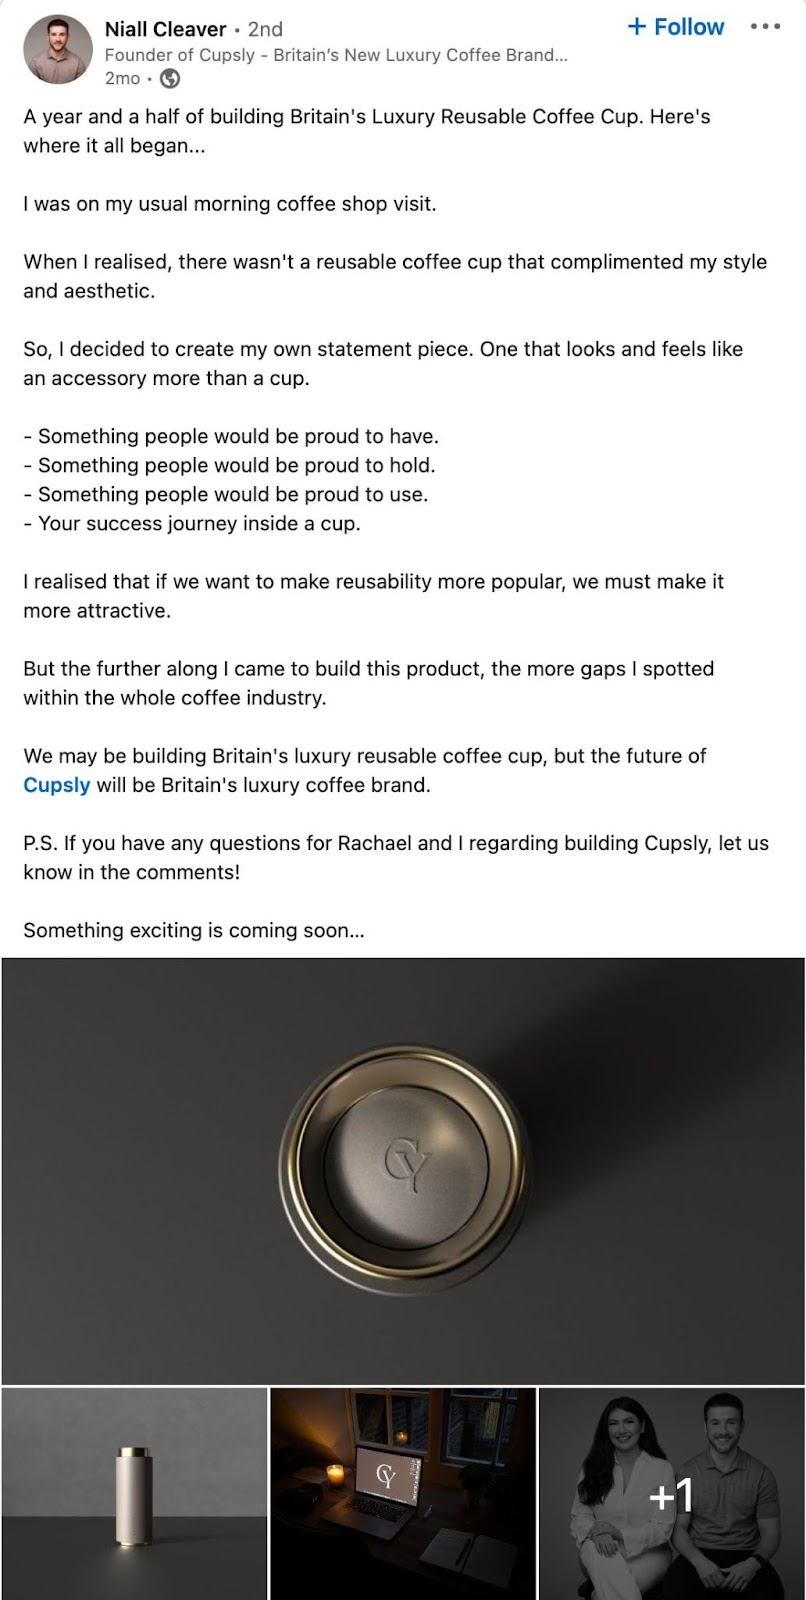 Niall Cleaver's LinkedIn post on the story behind the idea for Cupsly